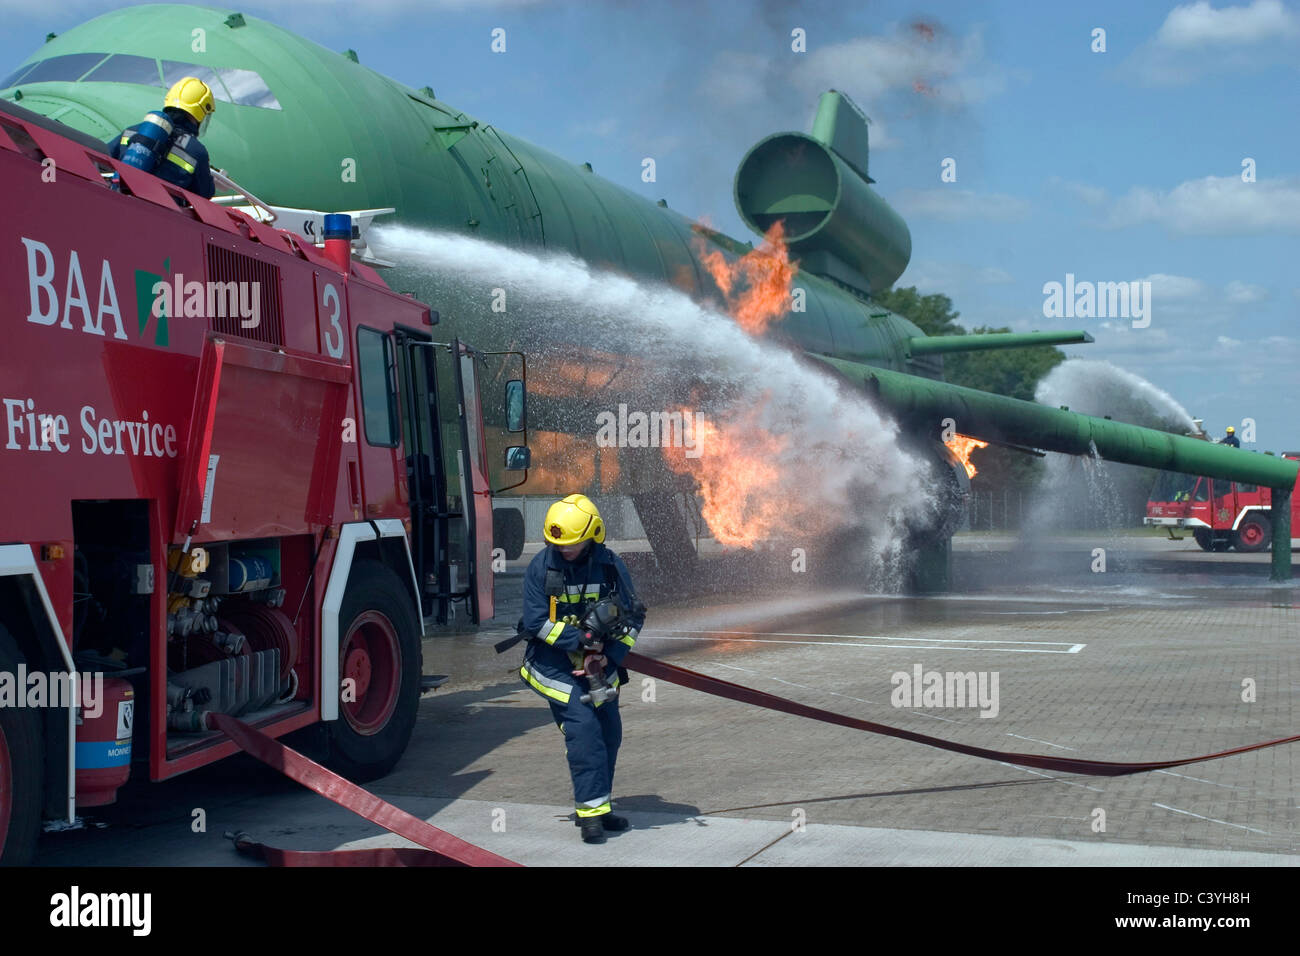 Airport fire crews practice fighting and engine fir eon an aircraft. Stock Photo